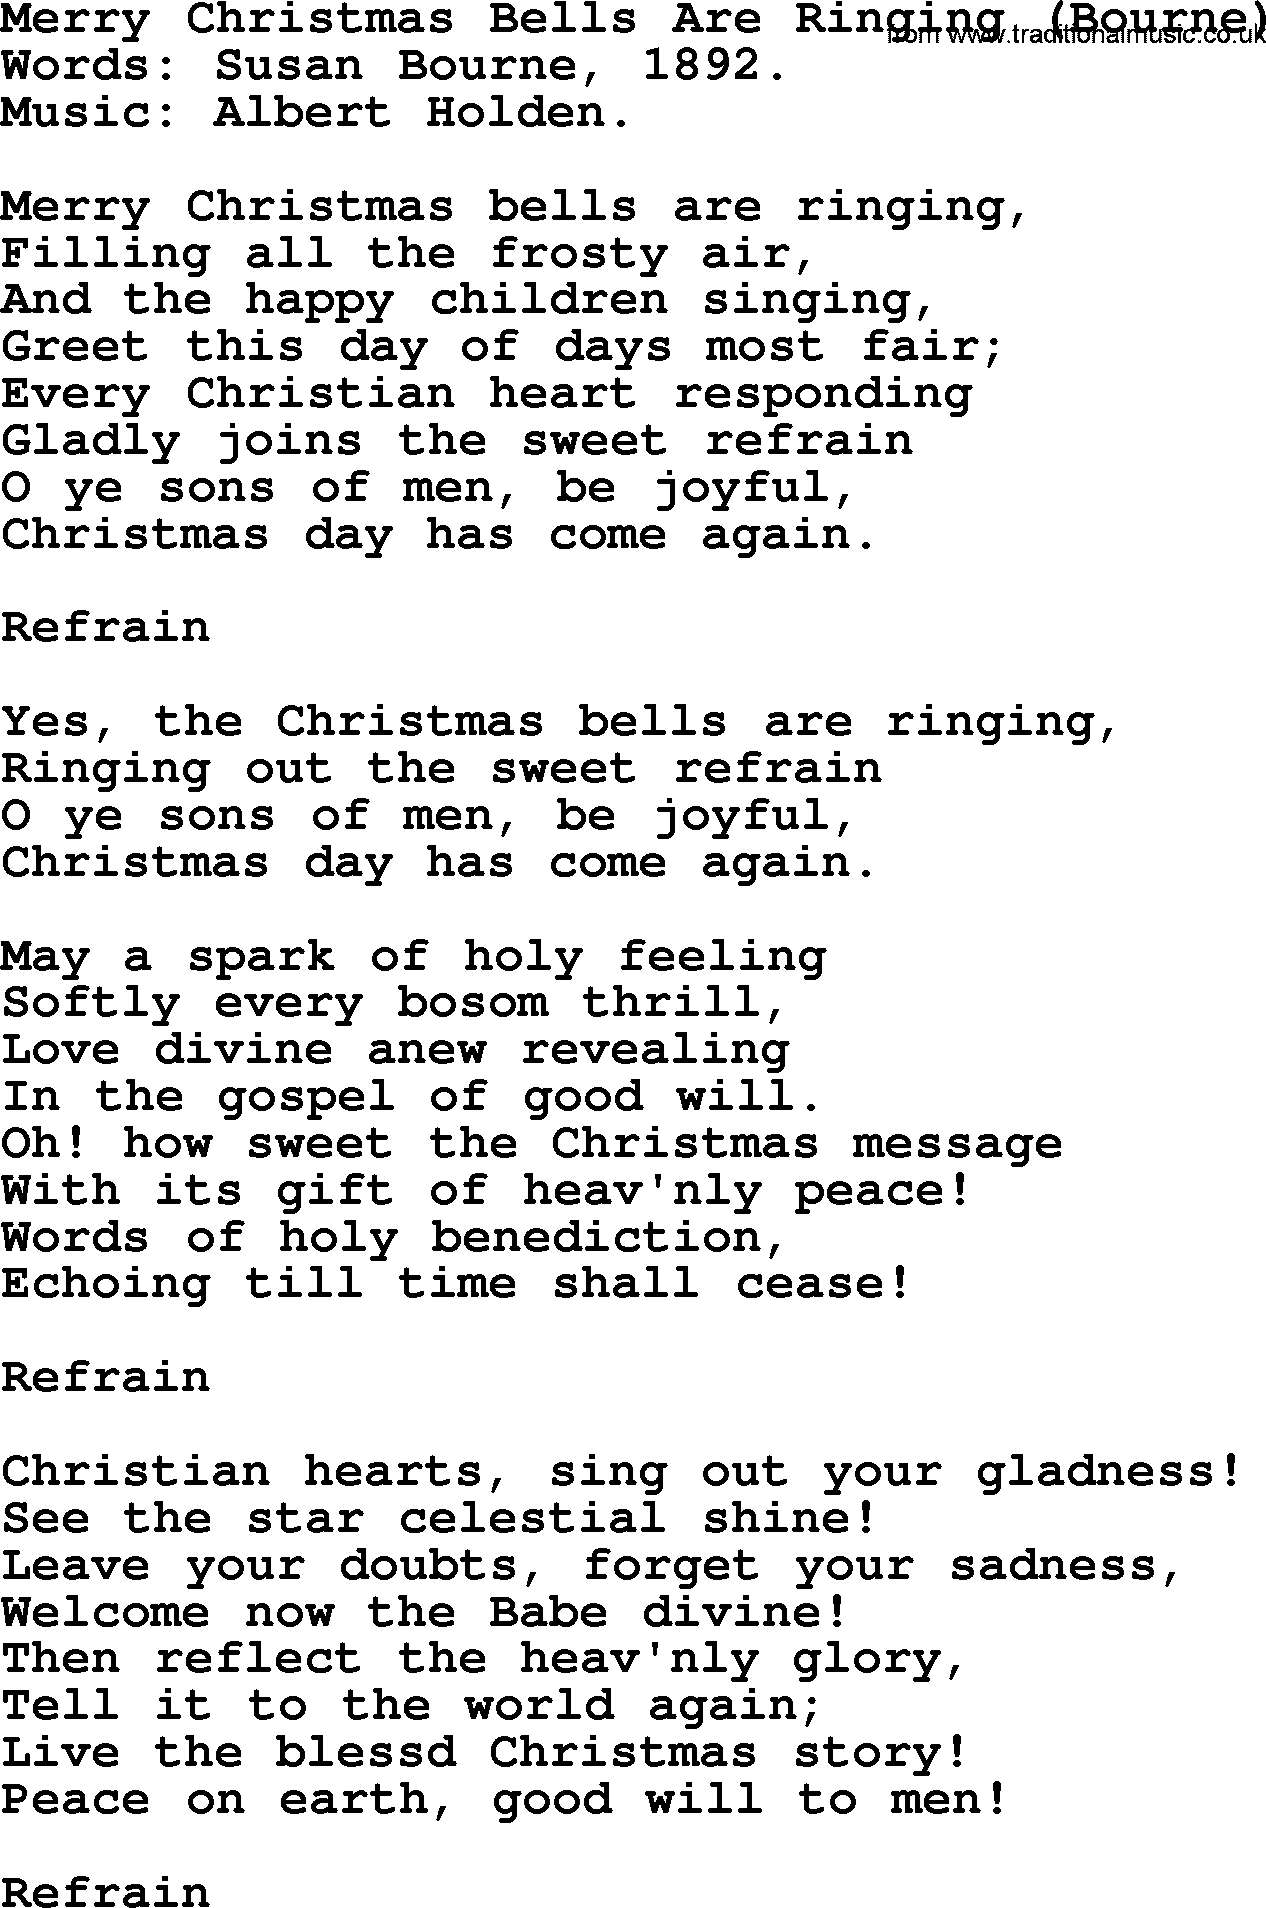 Christmas Hymns, Carols and Songs, title: Merry Christmas Bells Are Ringing (bourne), lyrics with PDF